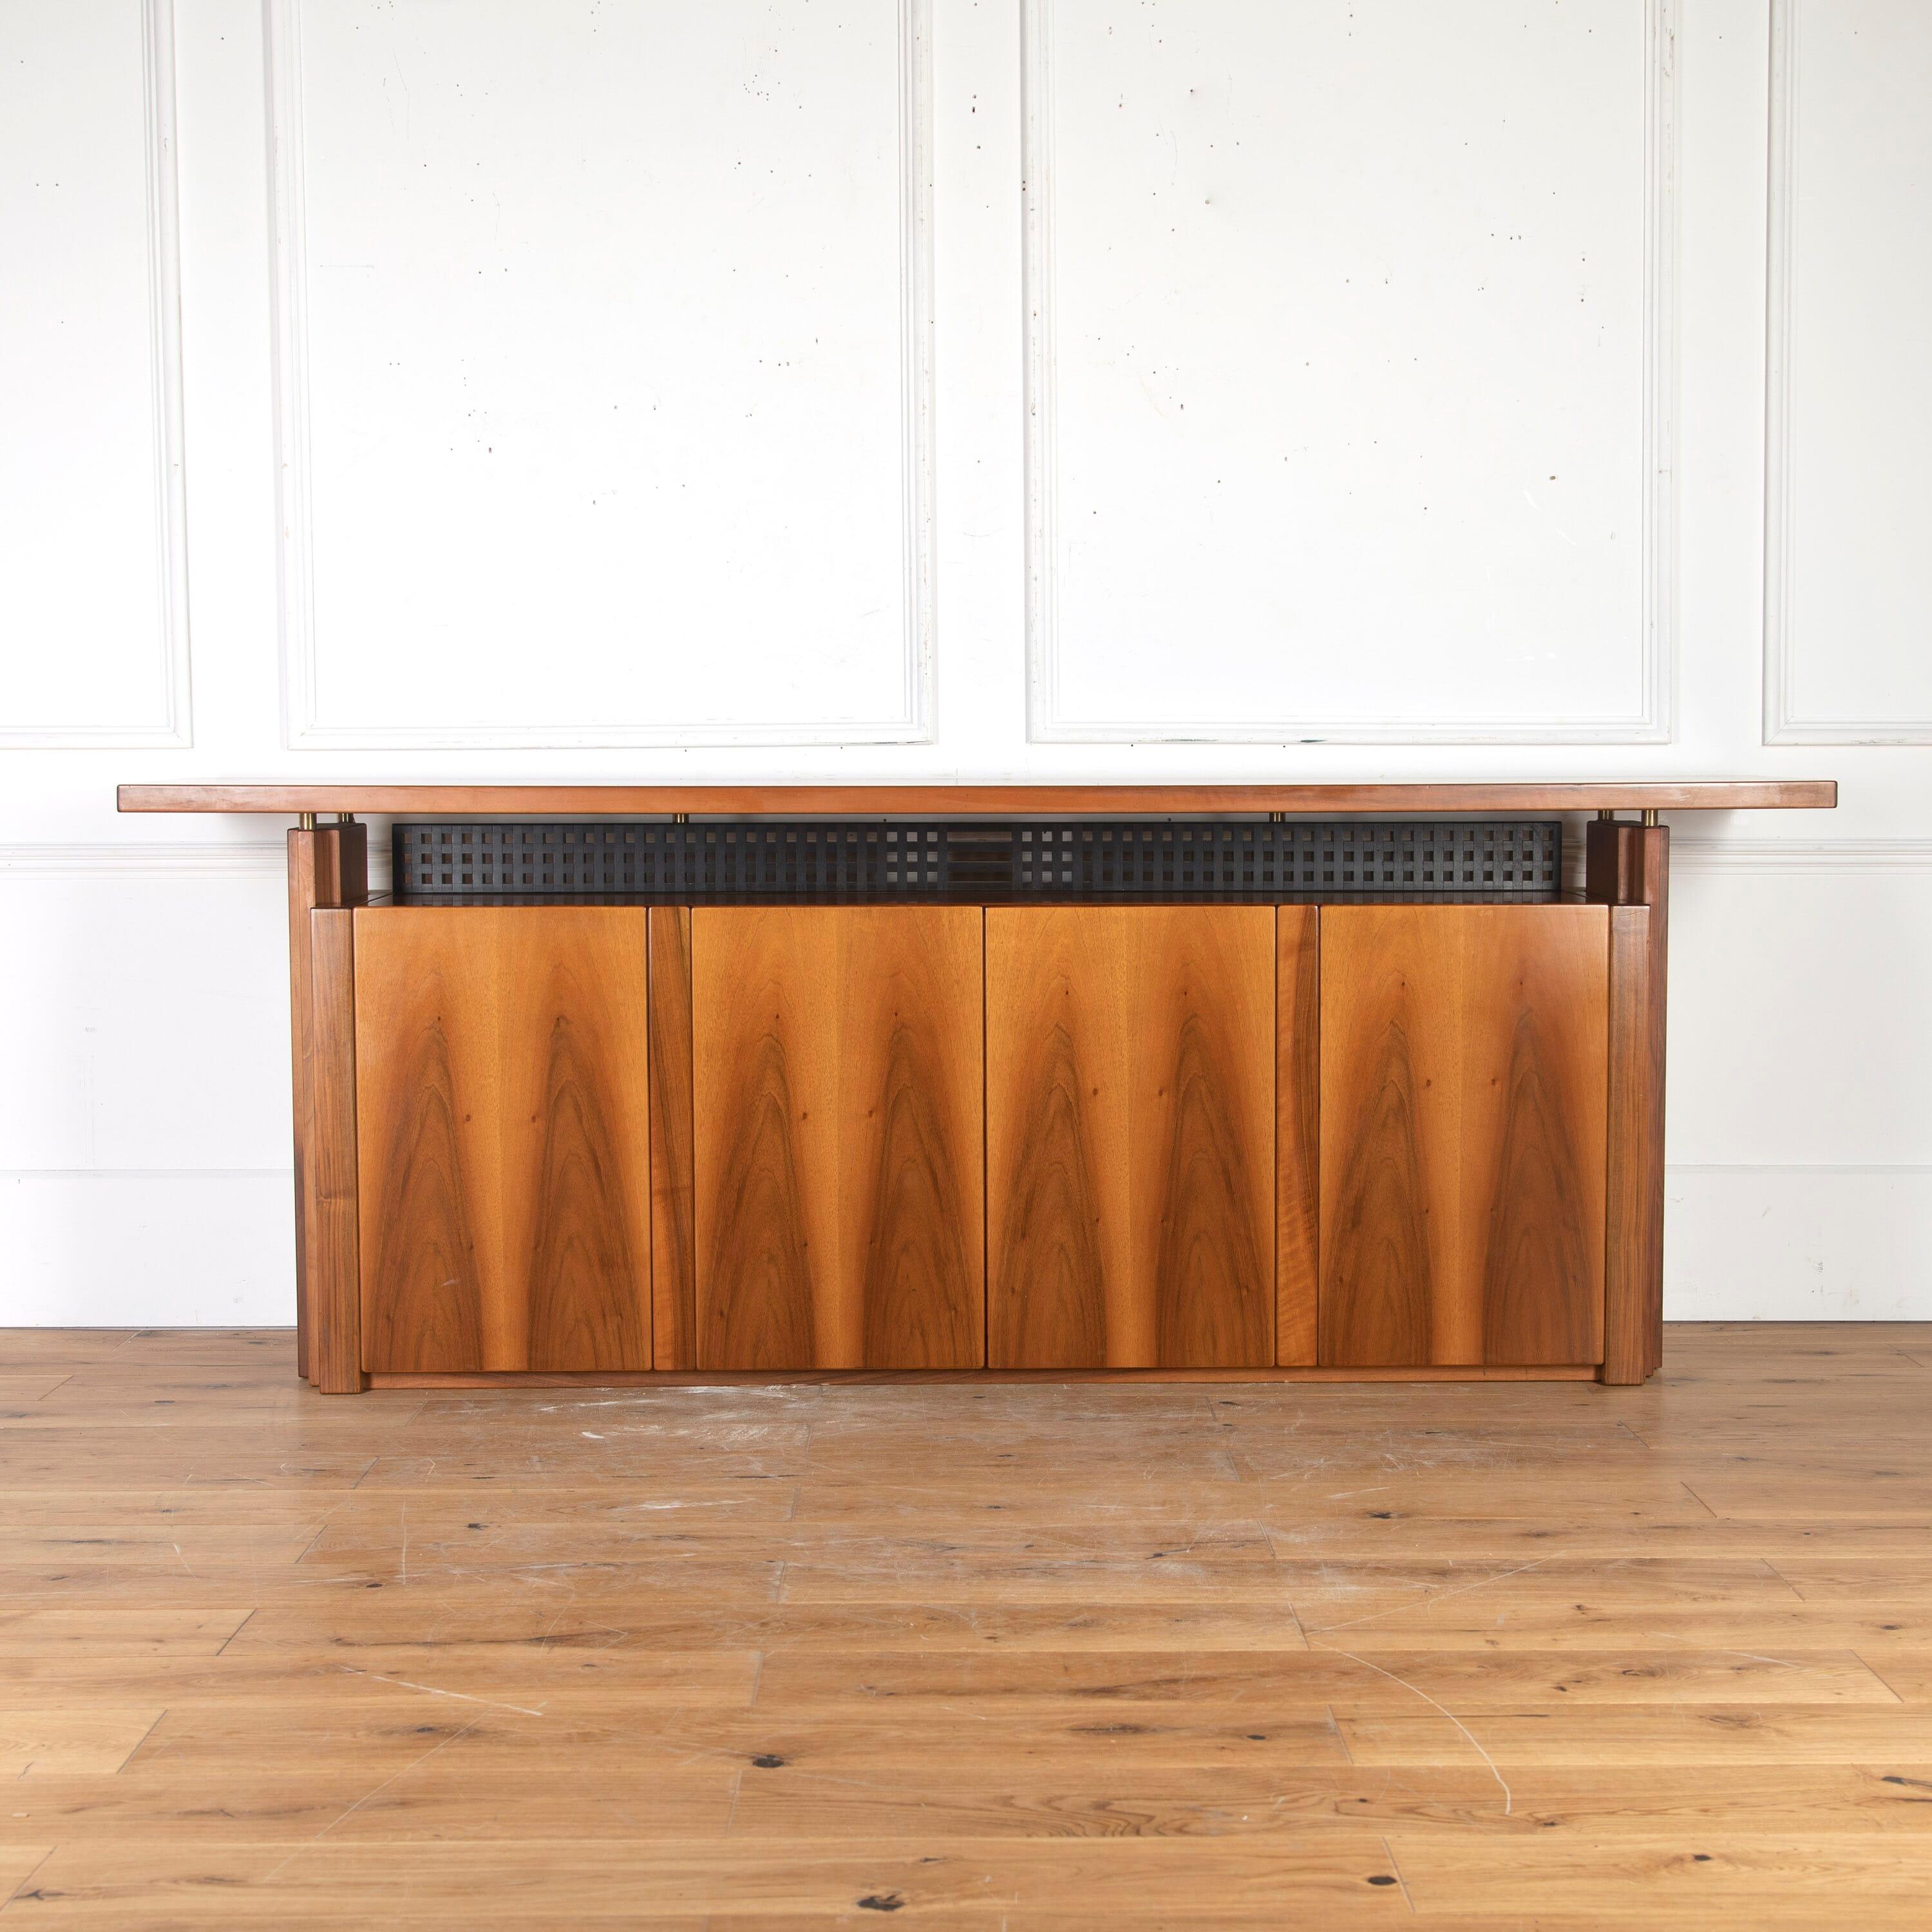 Stunning Italian mid century sideboard by Carlo Scarpa.

Scarpa was one of the most important architects of the 20th century. This piece was commissioned by Andrea Olivetti in 1957 and displayed in his showroom. 

This is a fantastic collector's